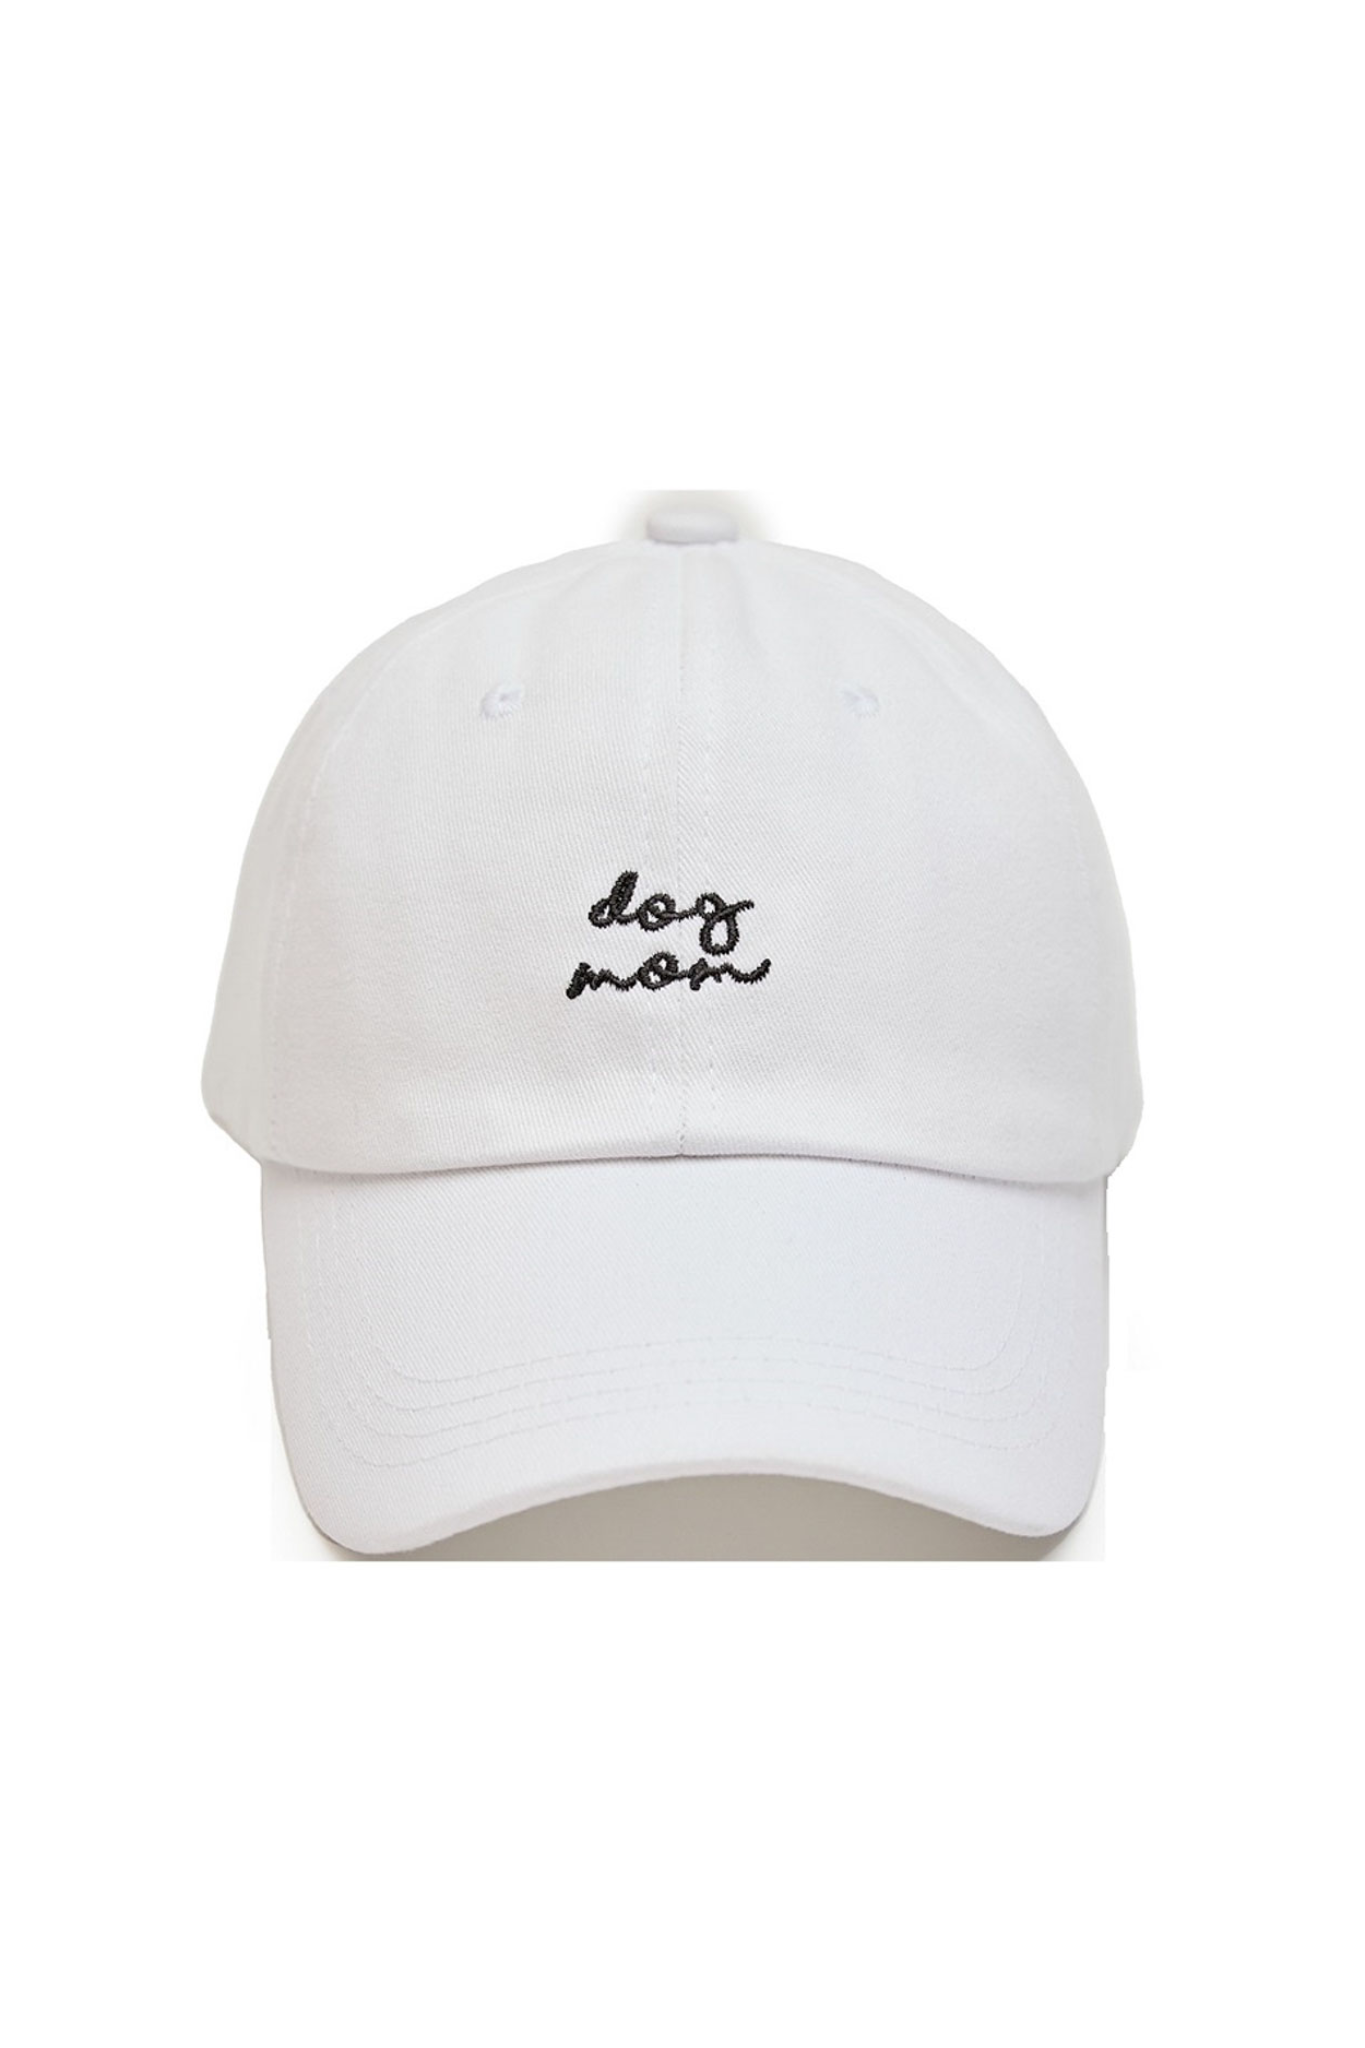 View 3 of Dog Mom Hat in White, a Hats from Larrea Cove. Detail: .